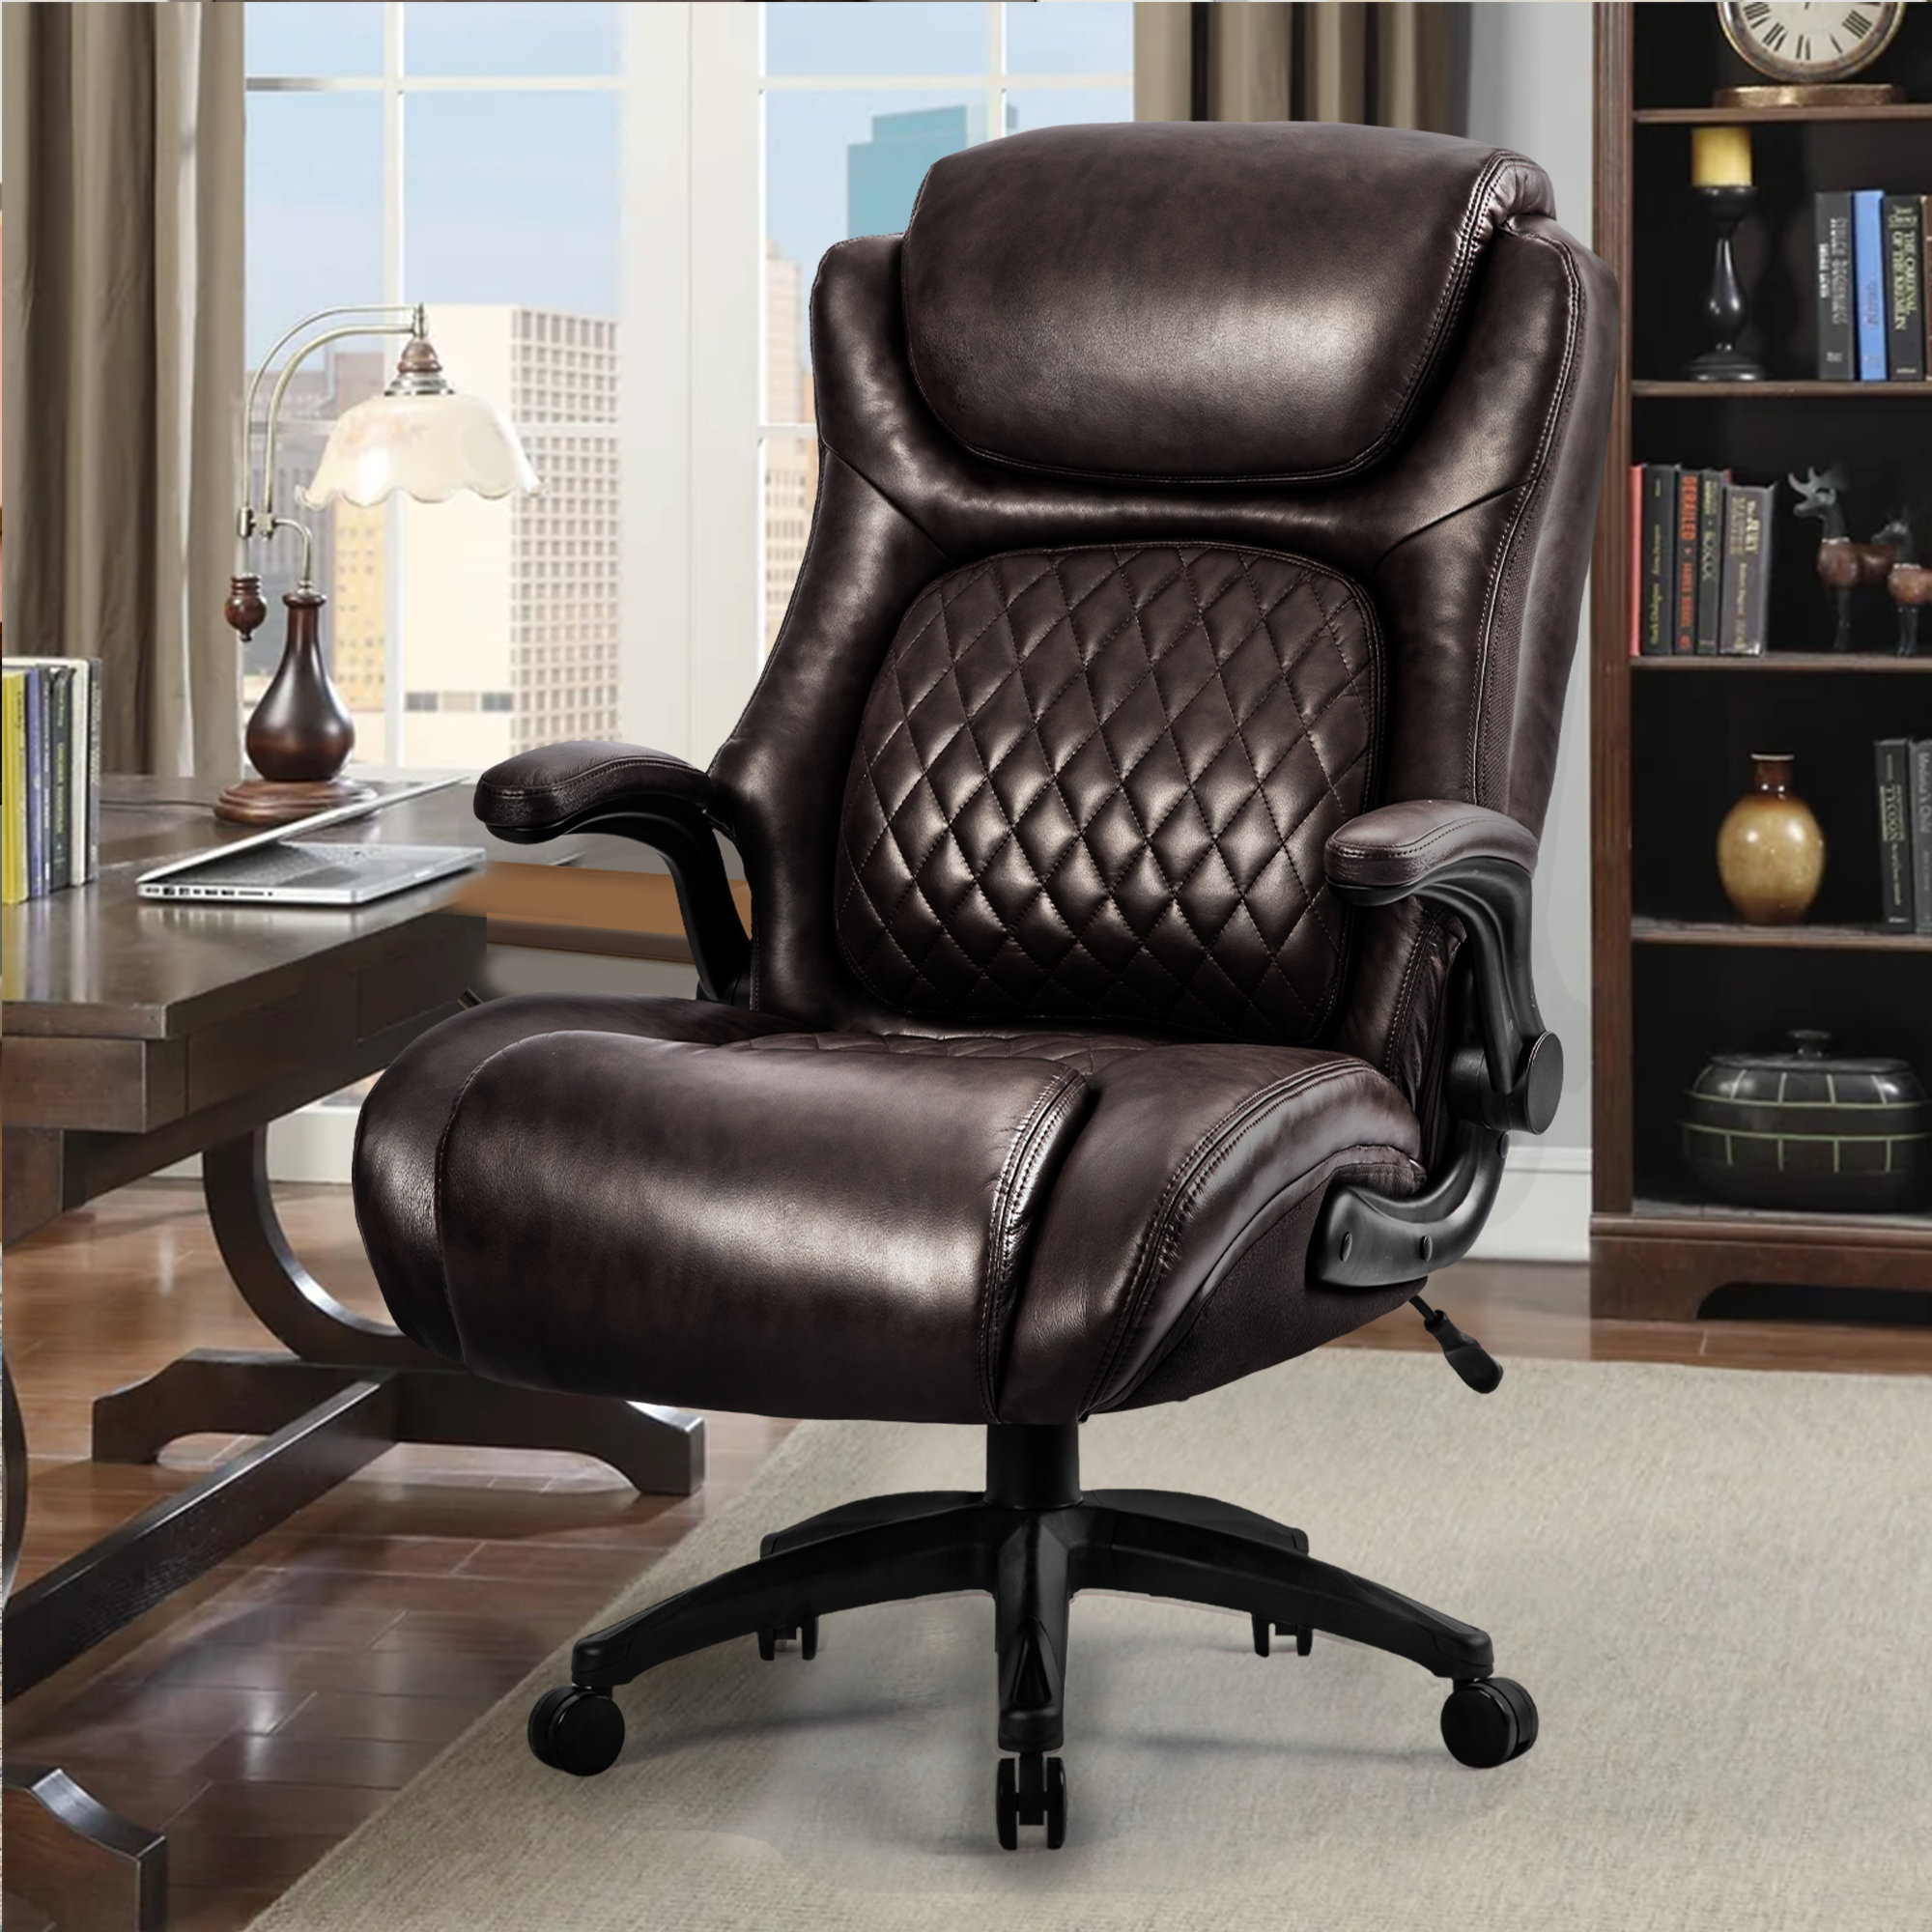 Big and Tall Office Chair High Back Leather Executive Office Chair  Comfortable Thickening Padded Cushion Leather Chair All Day Comfort Wide  Seat